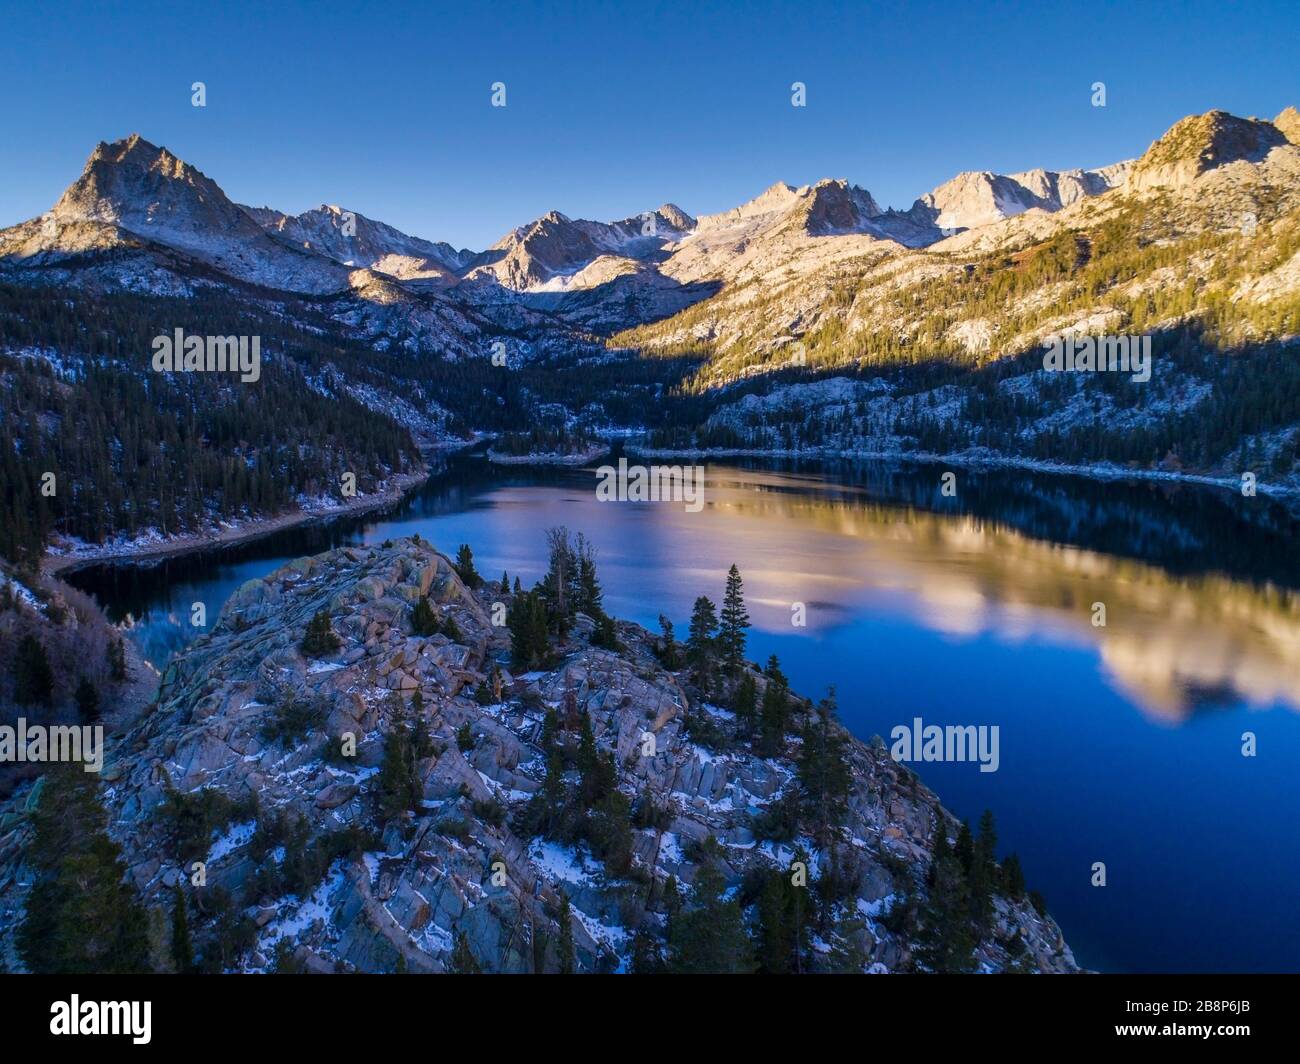 Aerial View of South Lake in winter, Sierra Nevada Mountains, California Stock Photo